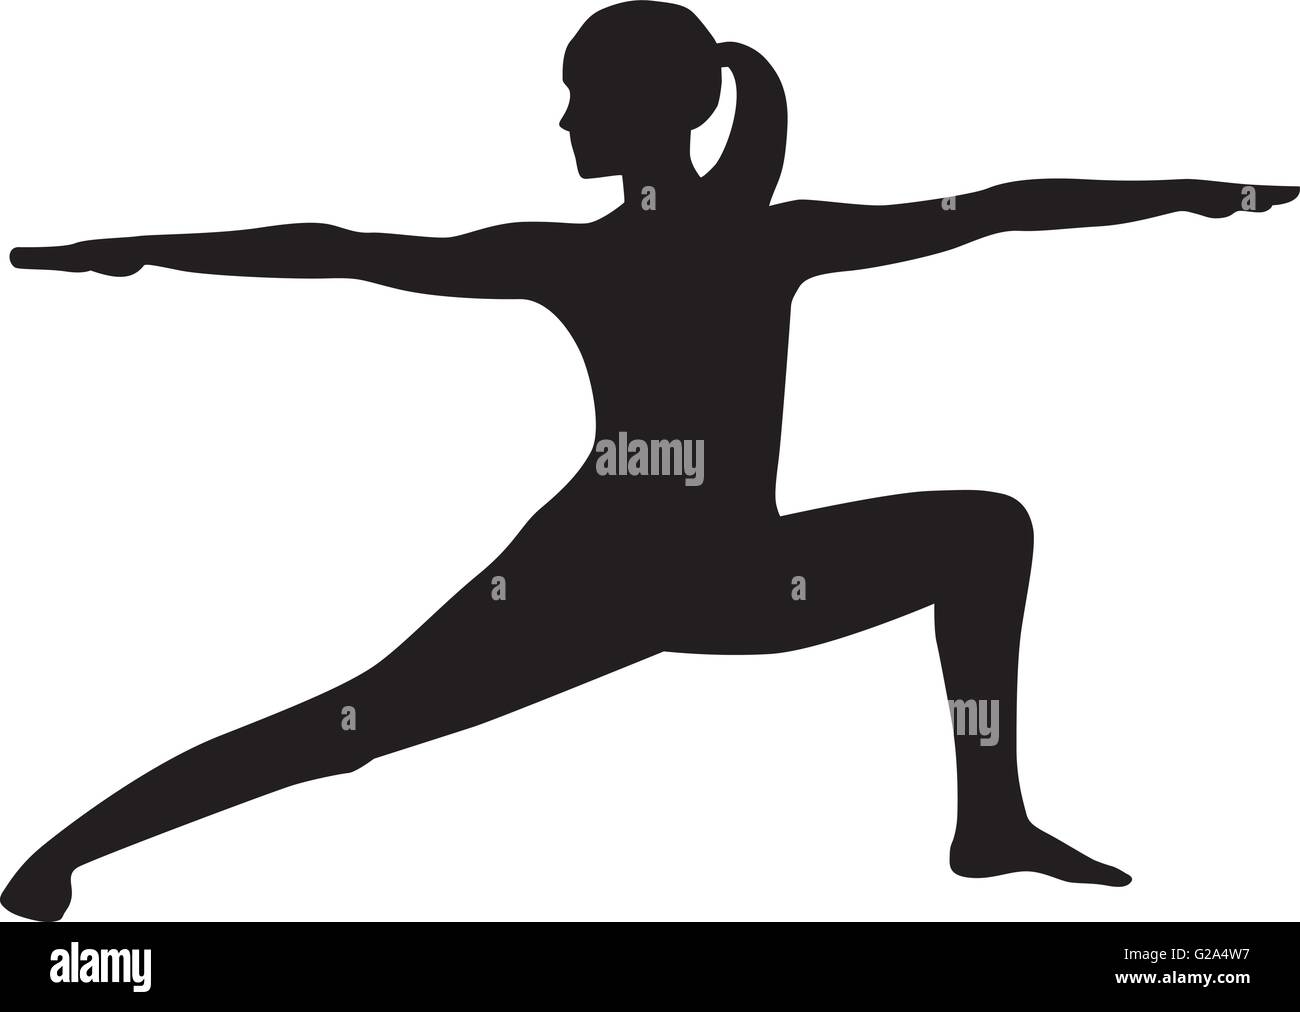 Yoga warrior pose Stock Vector Images - Alamy